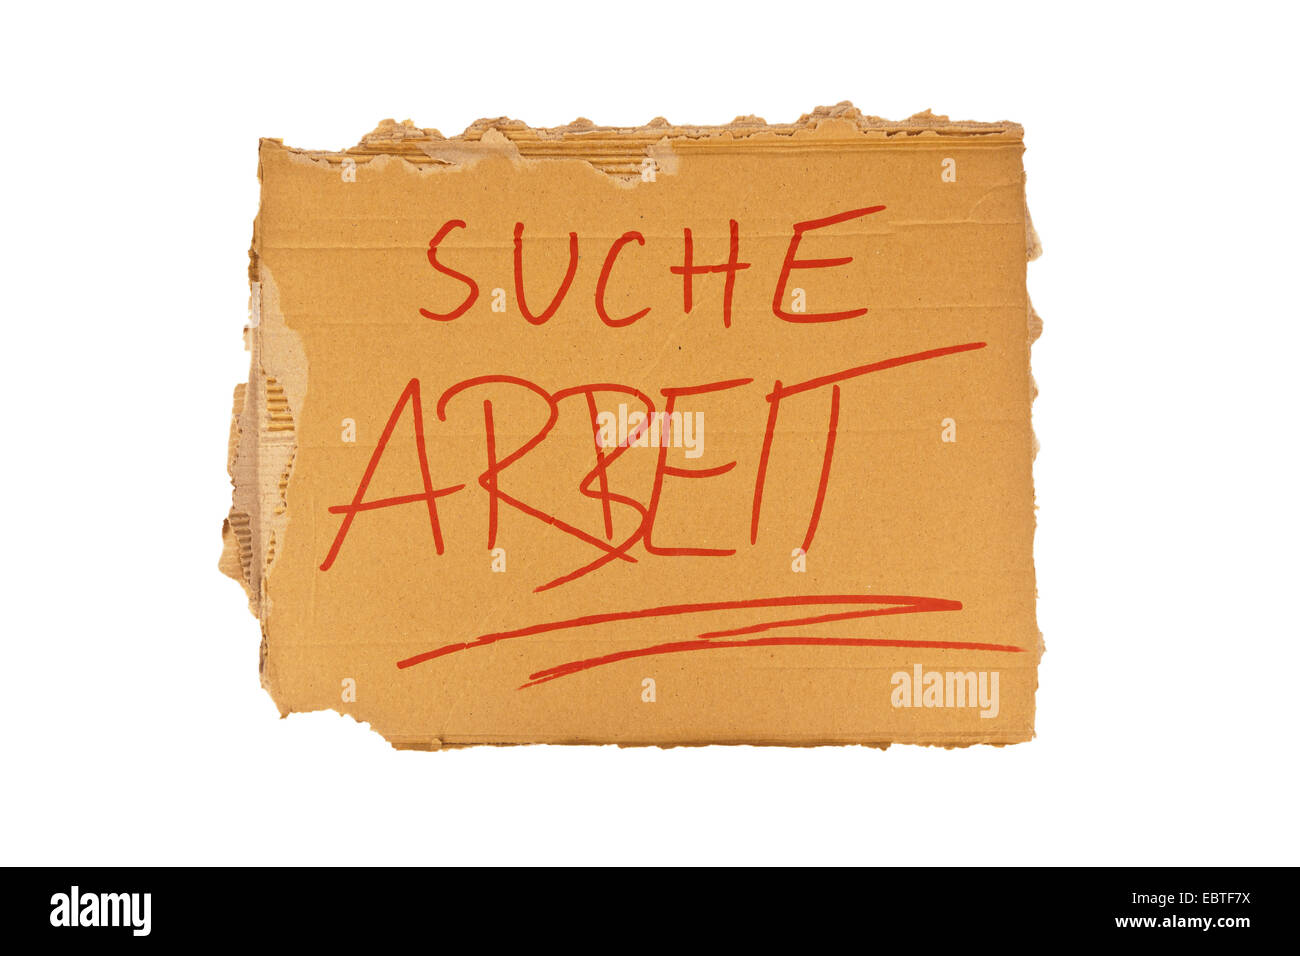 cardboard sign of a homeless person with the inscription 'Suche Arbeit' ('Looking for work') Stock Photo